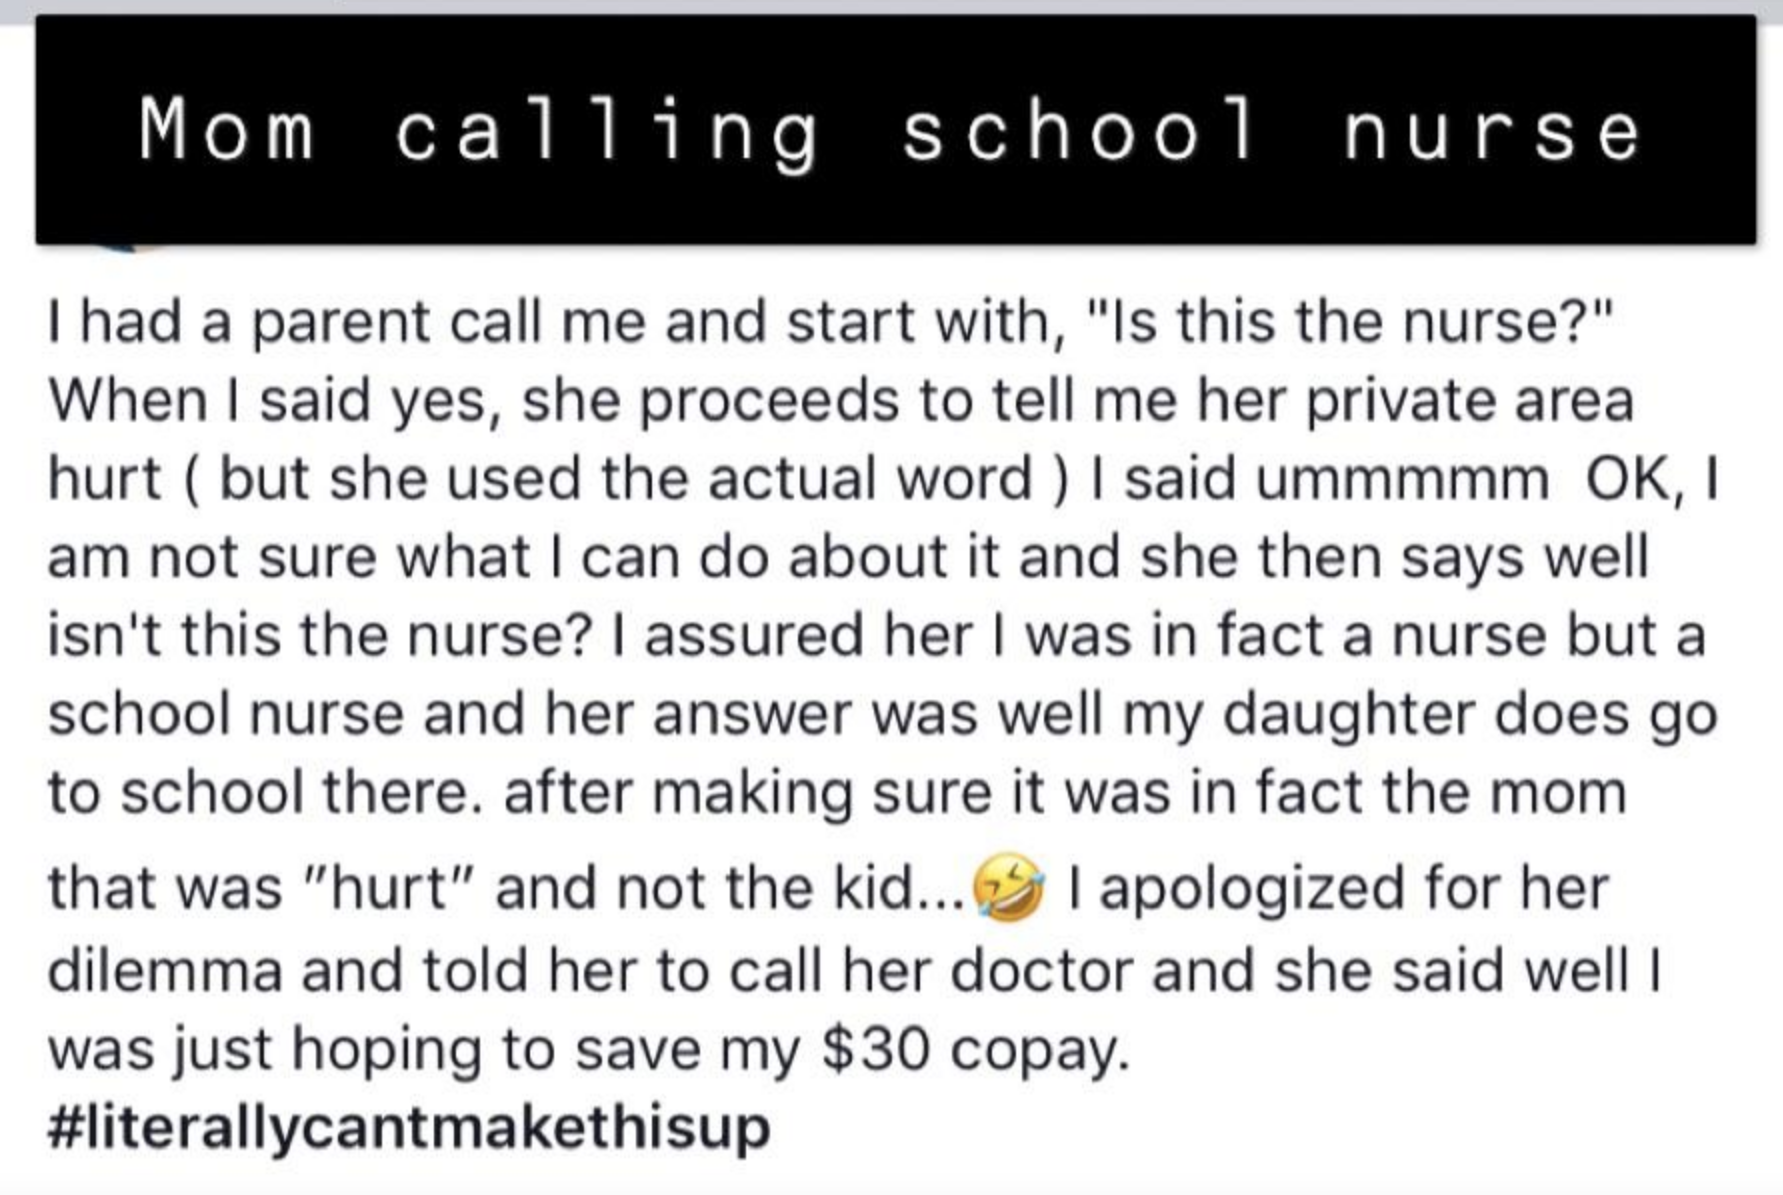 a mom calling the school nurse because her private area hurts and wants to save $30 by not paying a copay